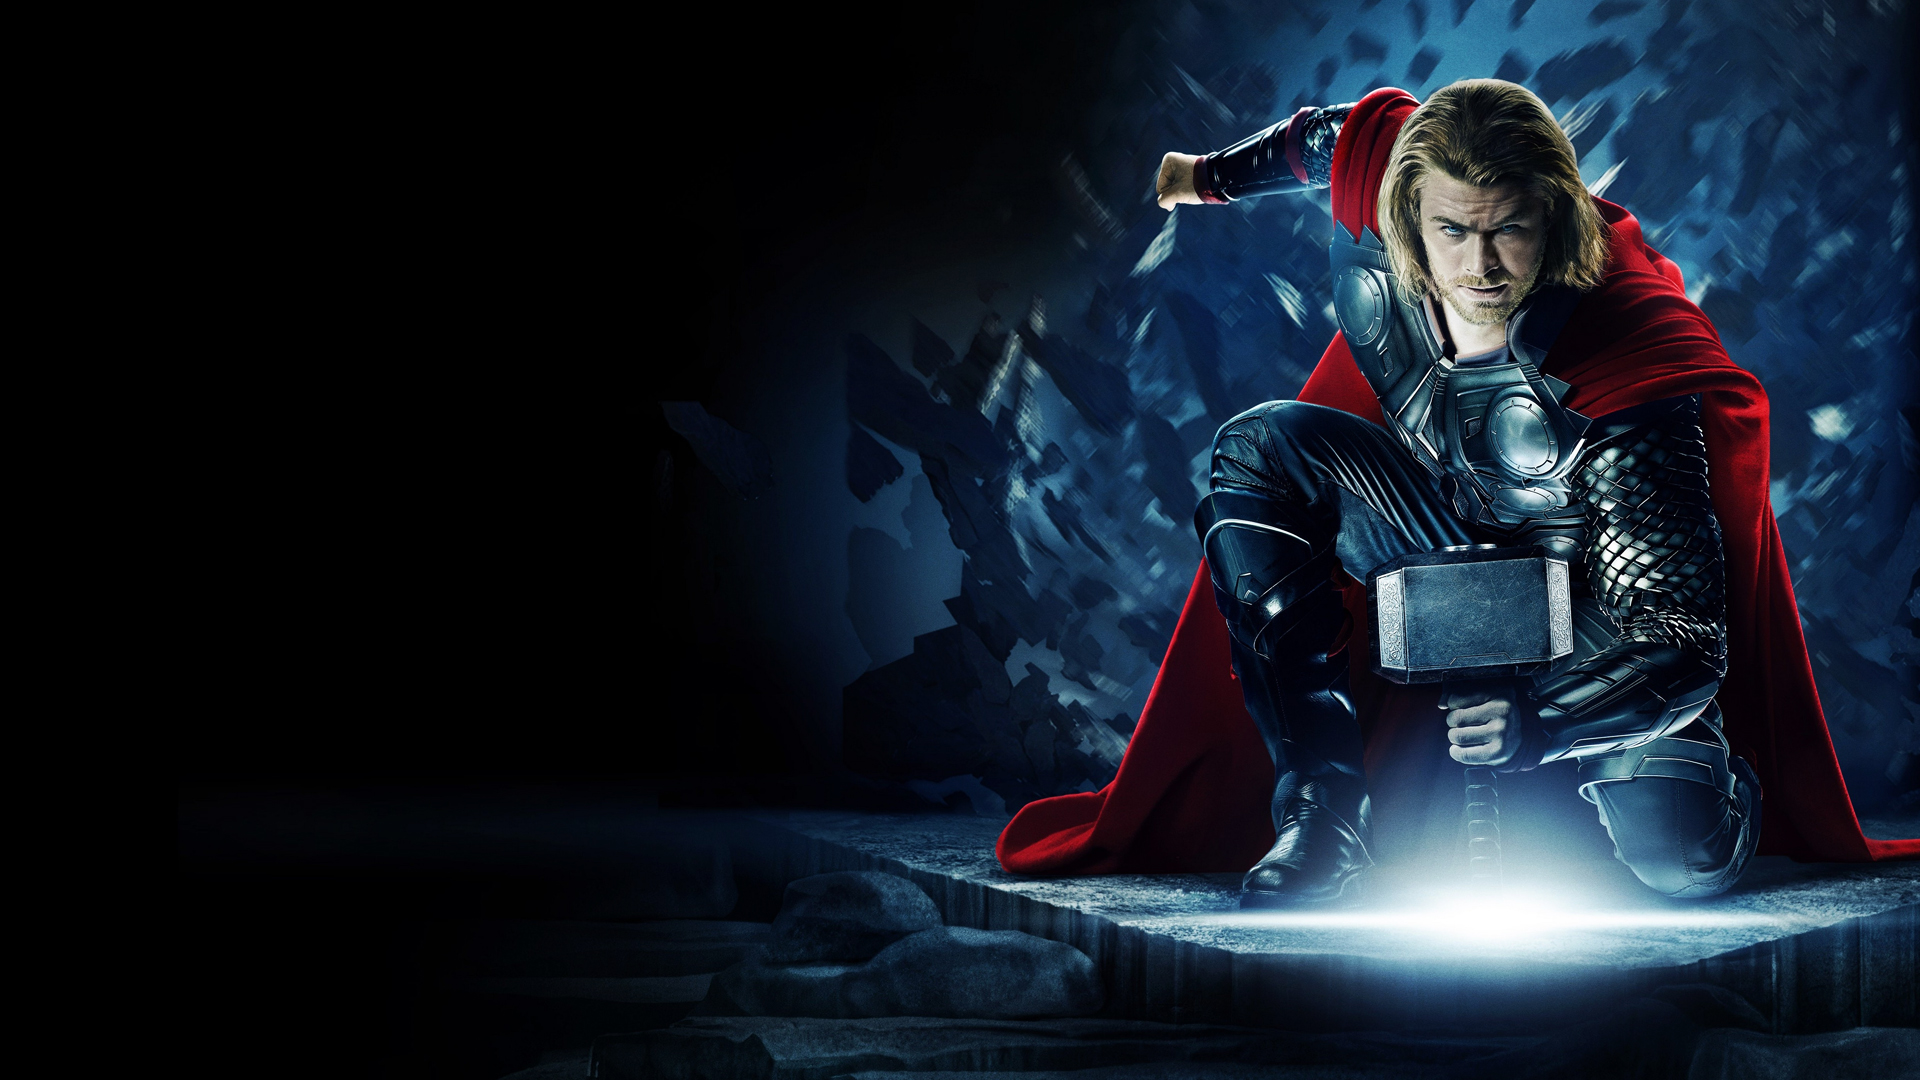 Thor Hammer HD Wallpaper Background Of Your Choice